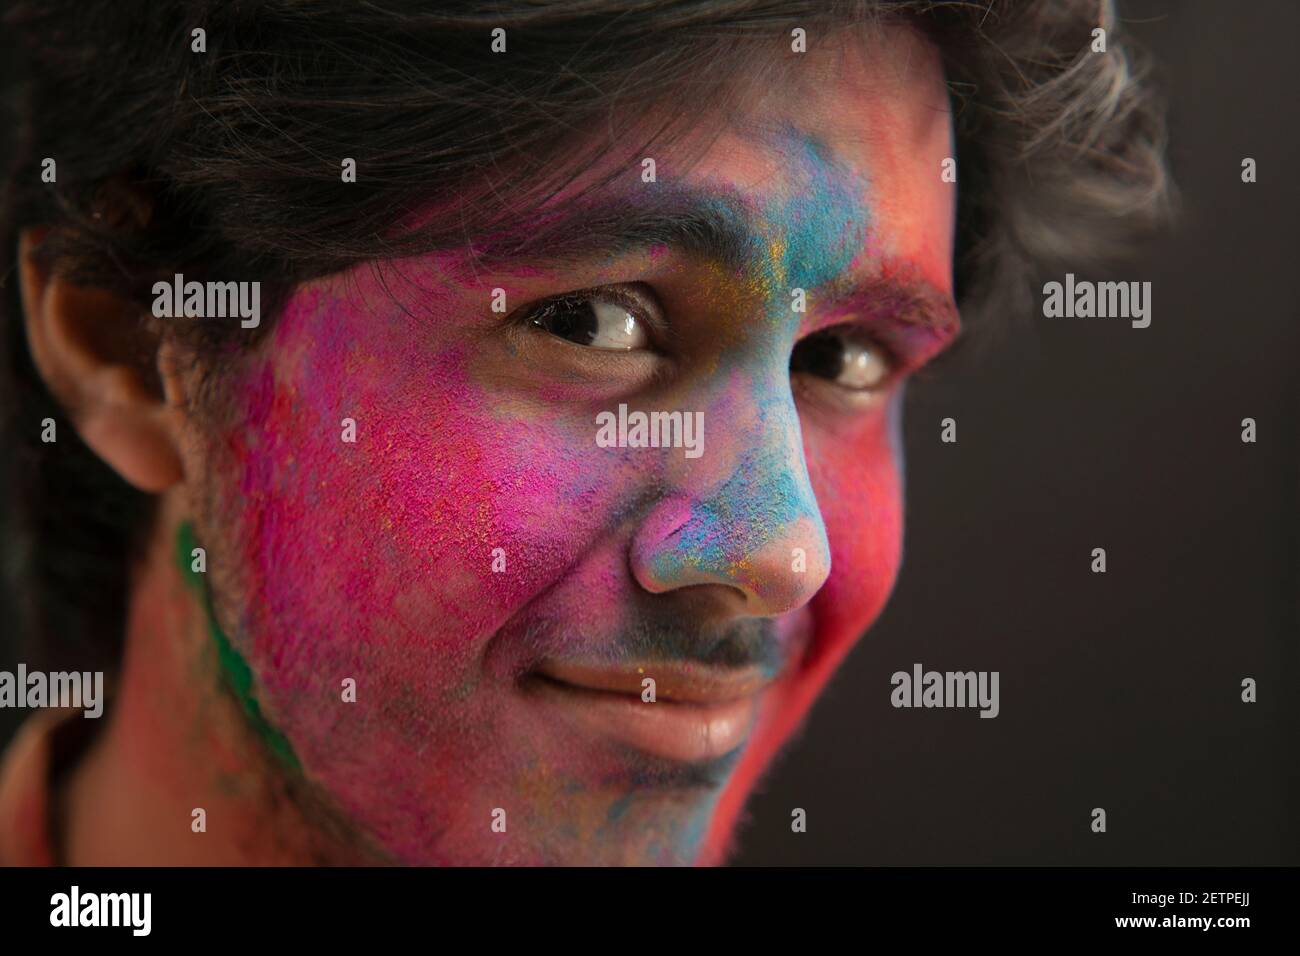 A YOUNG MAN WITH GULAL ON HIS FACE PLAYFULLY LOOKING AT CAMERA Stock Photo